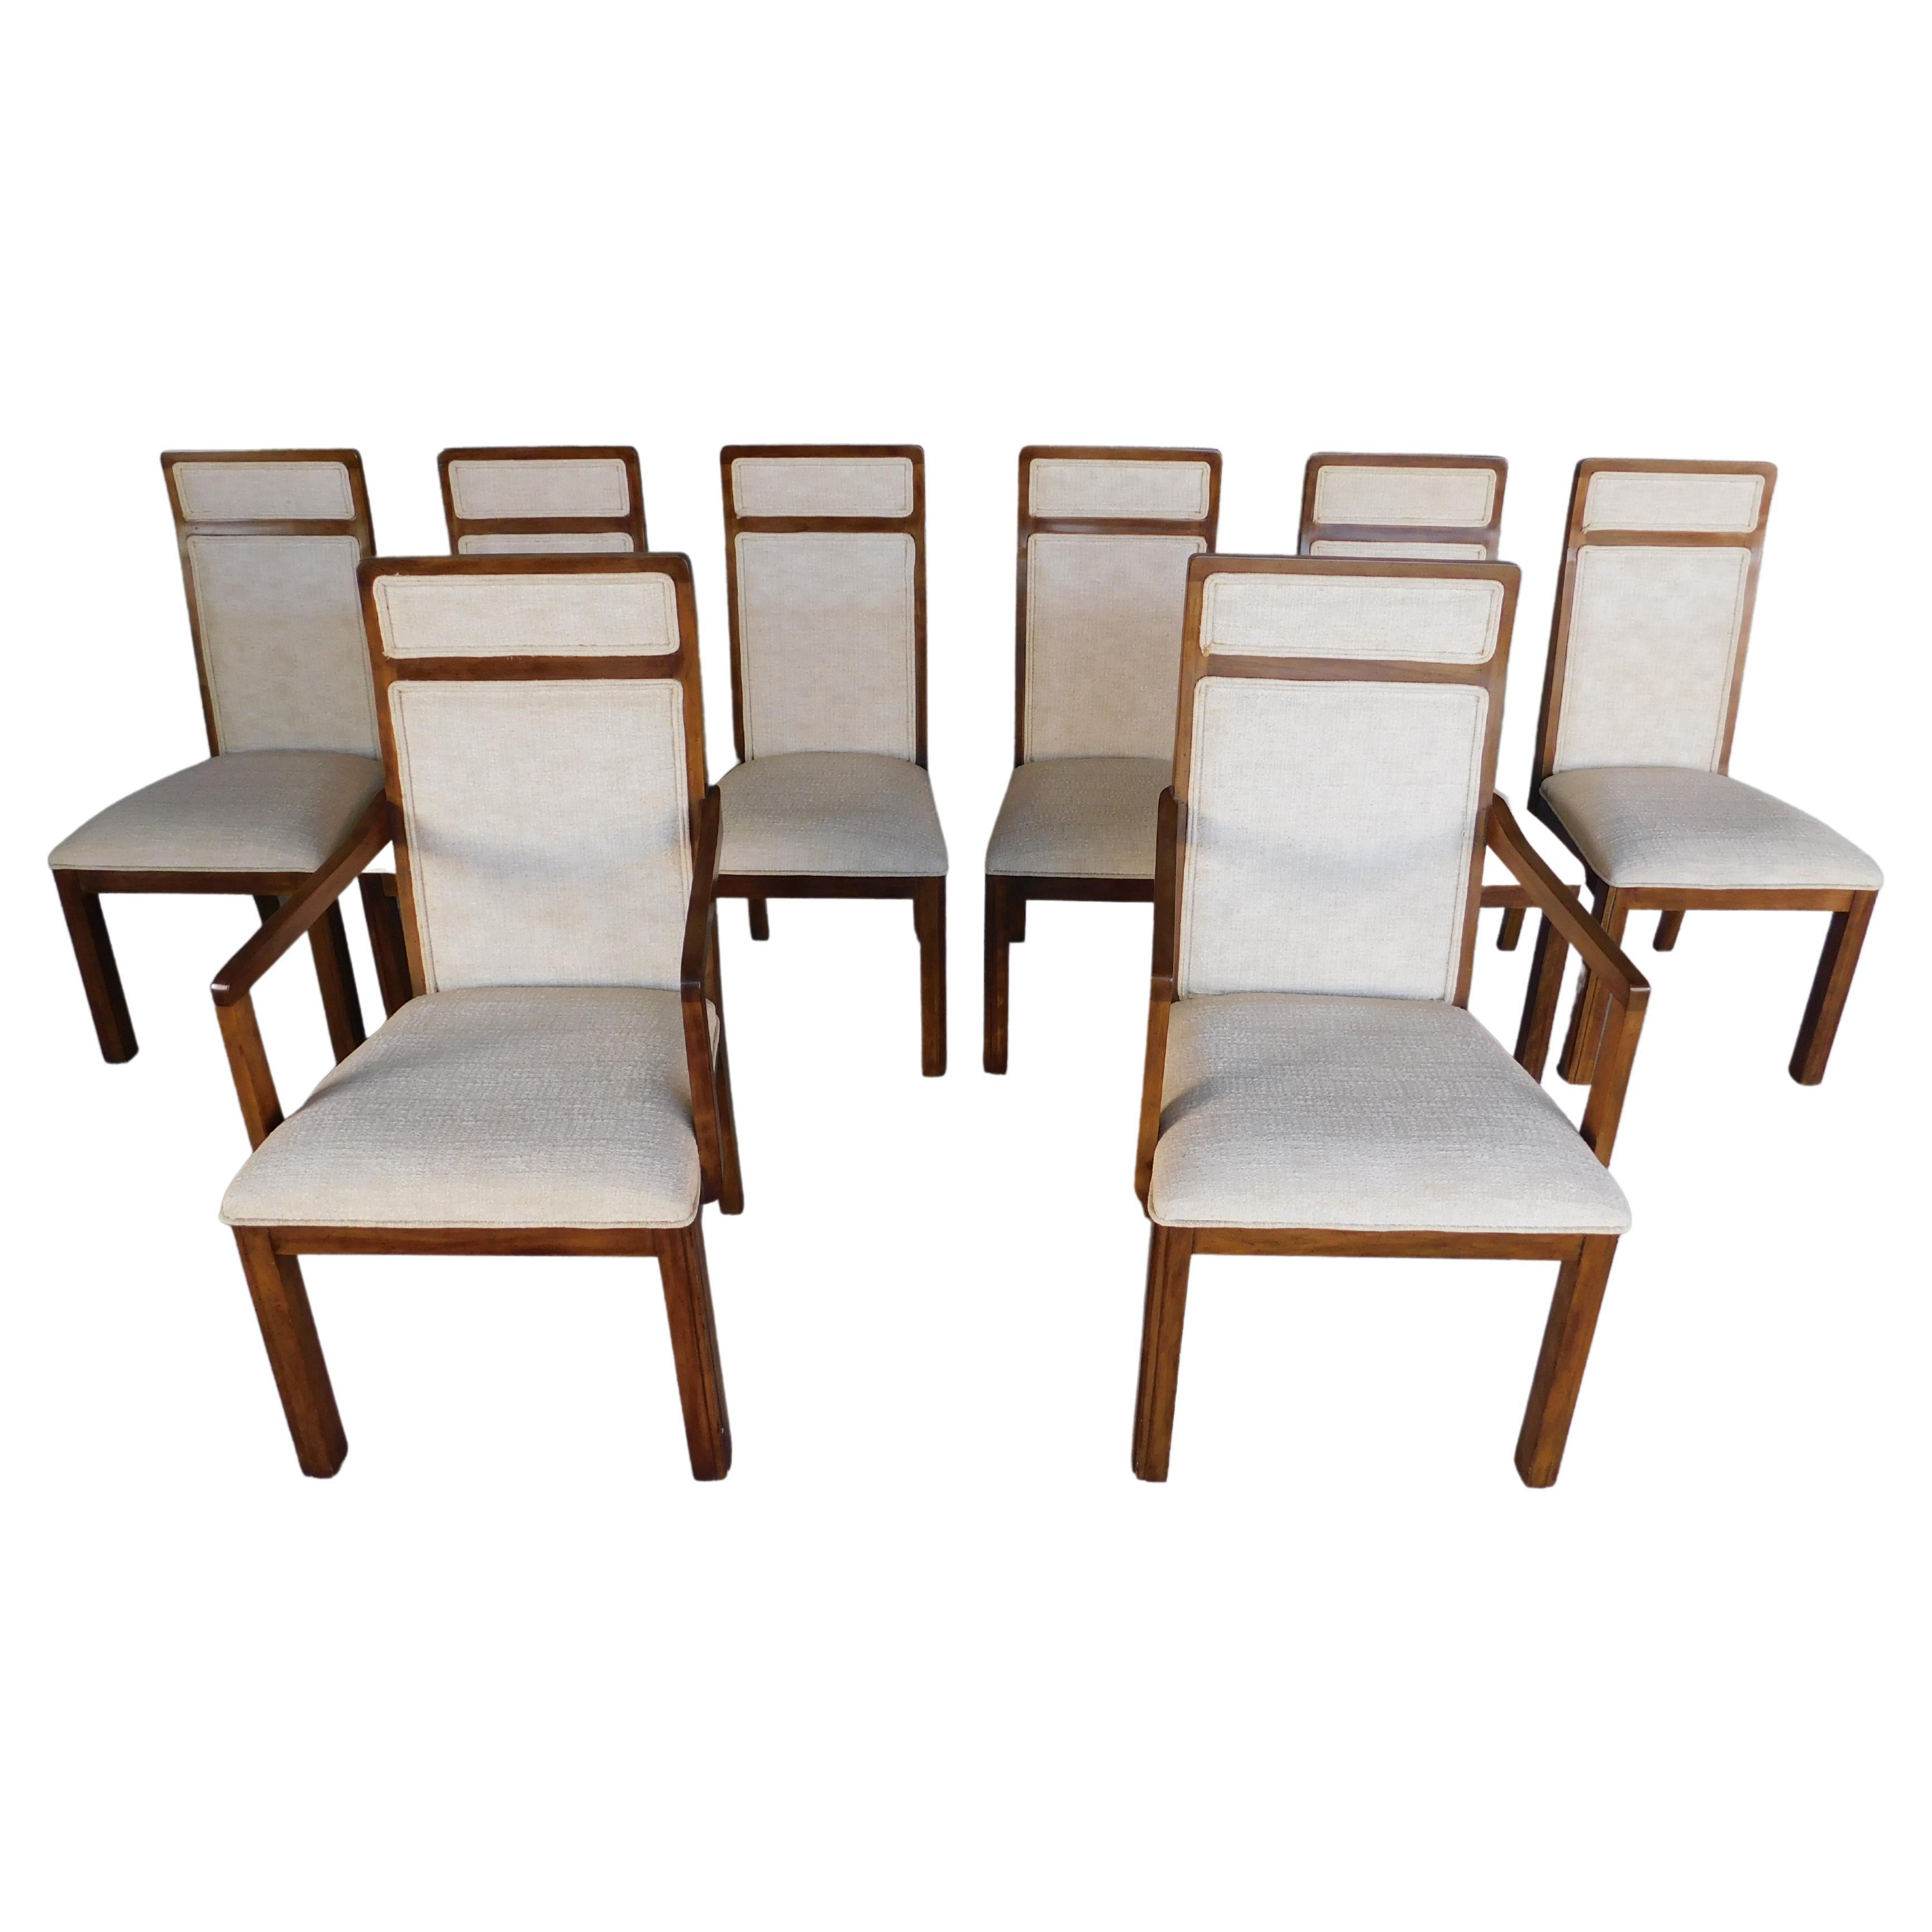 Mid-Century Modern Mahogany Chairs, Set of 8 by Davis Cabinet Company For Sale